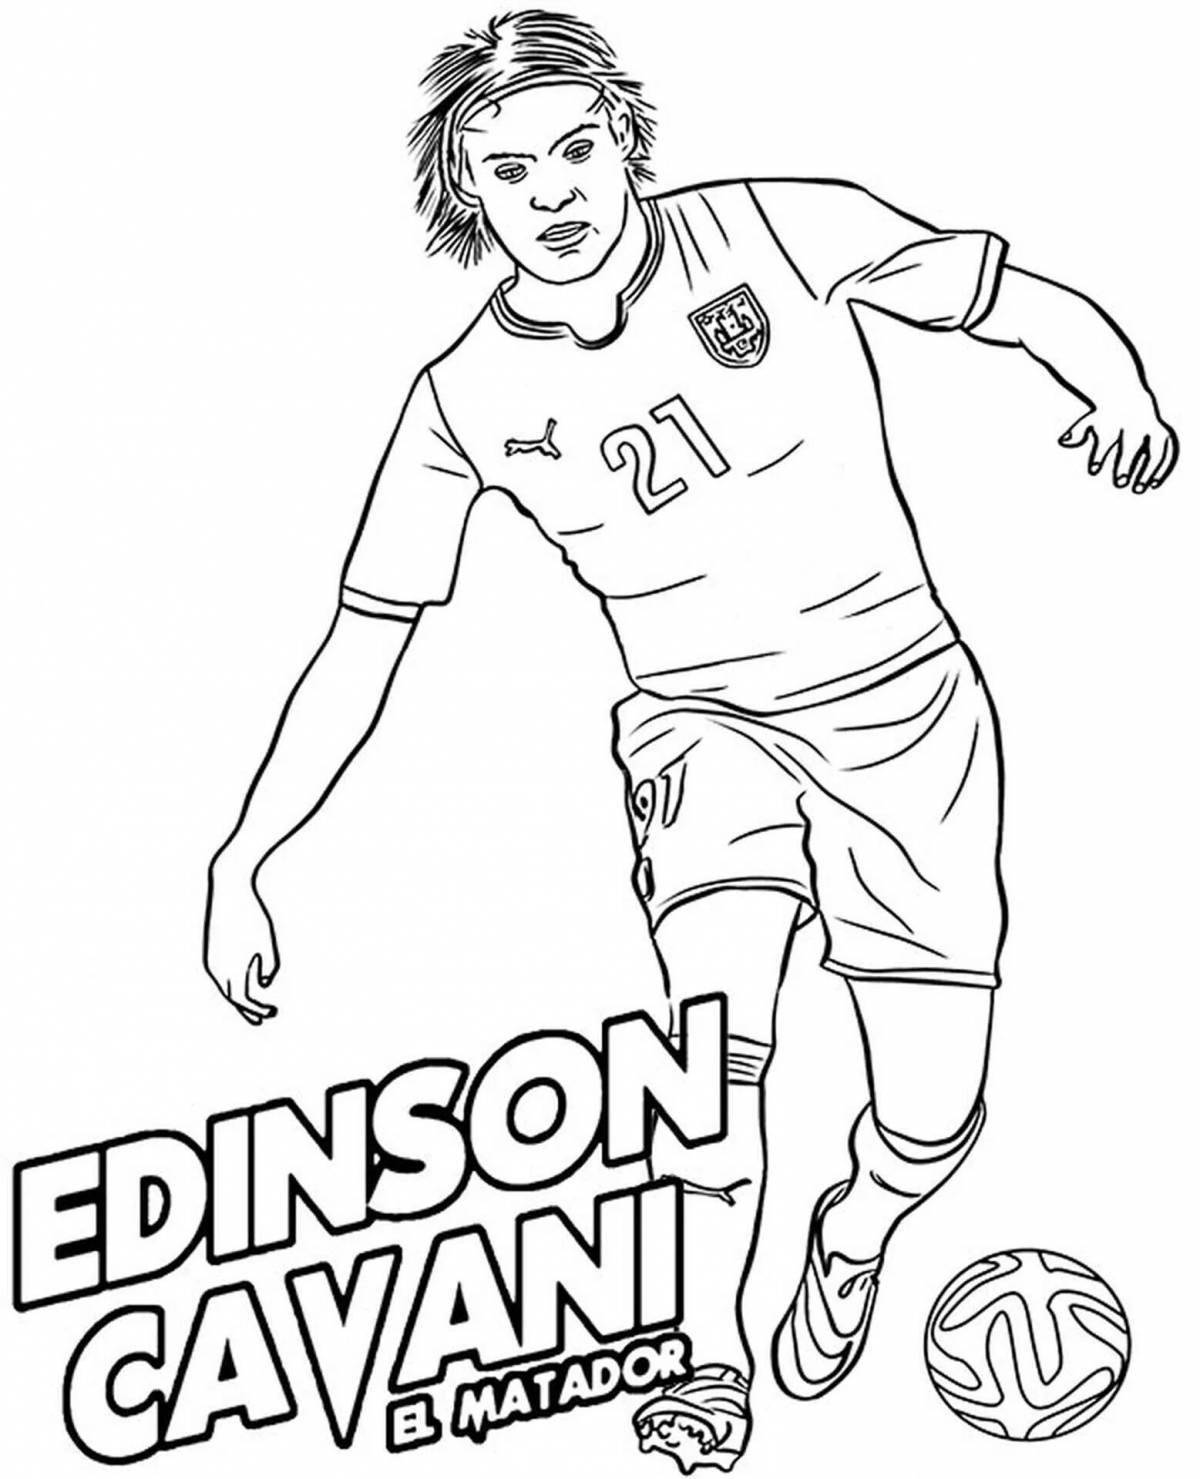 Coloring page funny football players psg